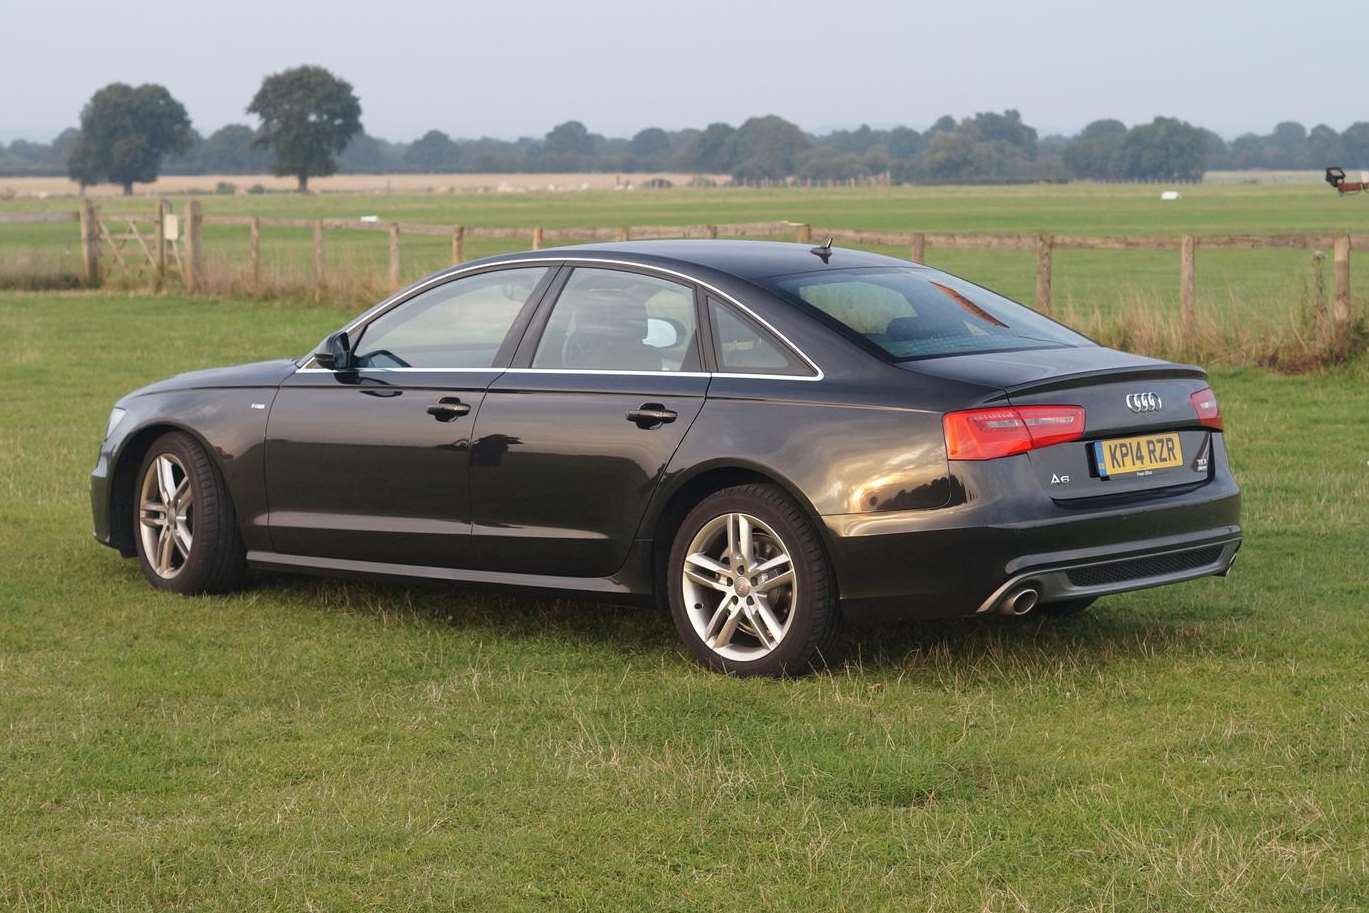 The A6 enjoys improved power, torque and efficiency over the existing model